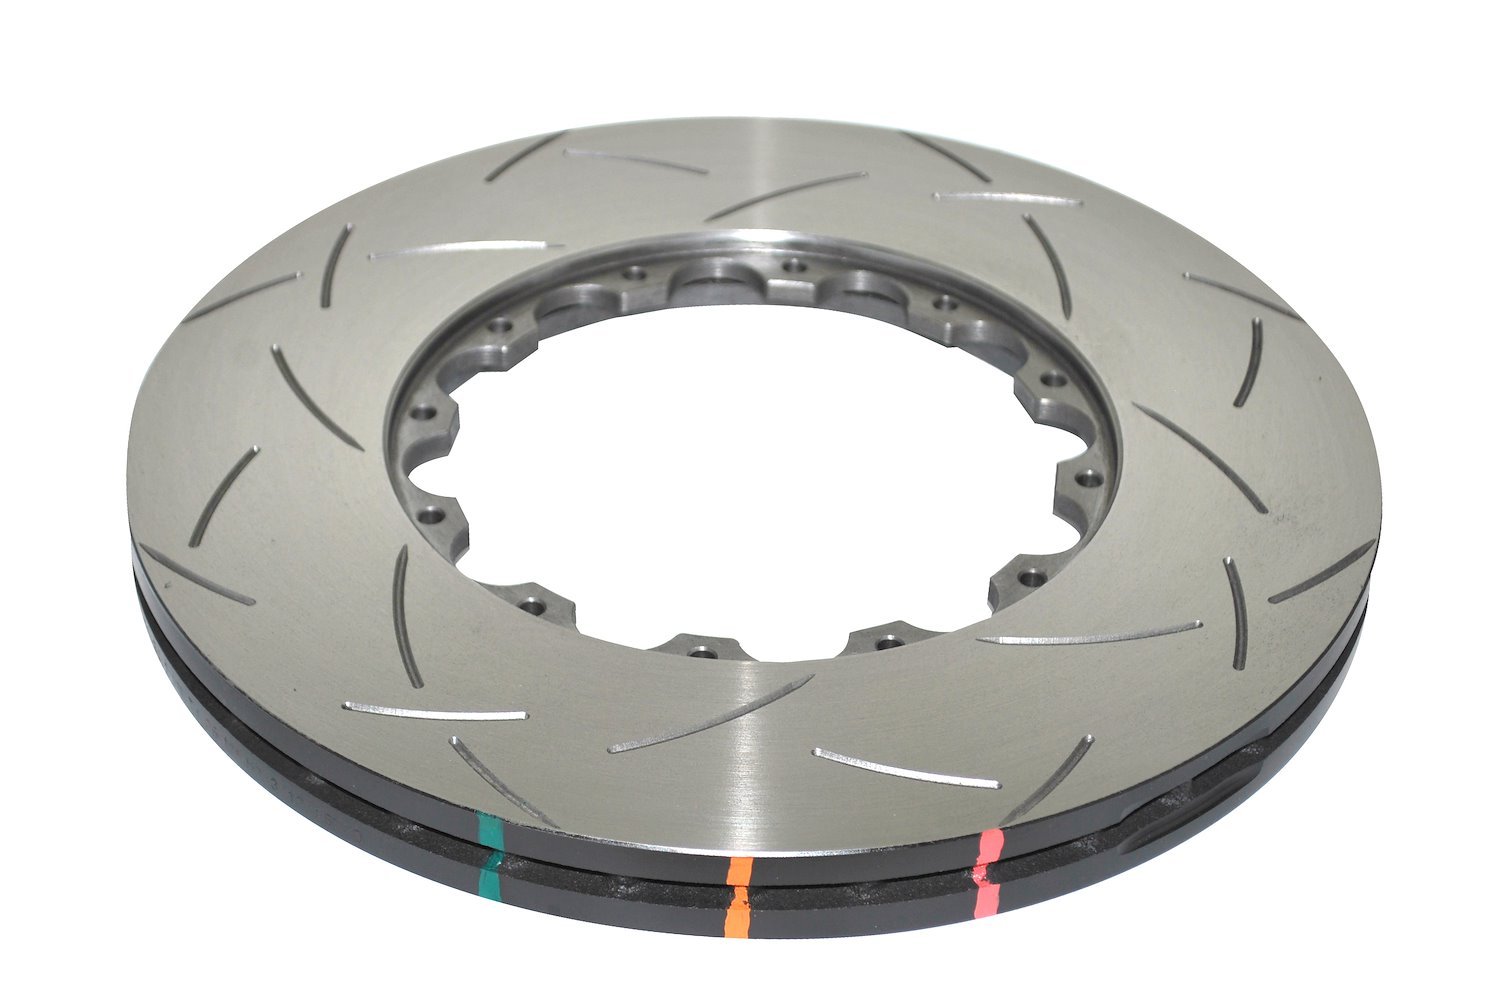 5000 Series T3 slotted Brake Disc Ring, T3 5000 Series Replacement Rotor (Nuts Only Included)